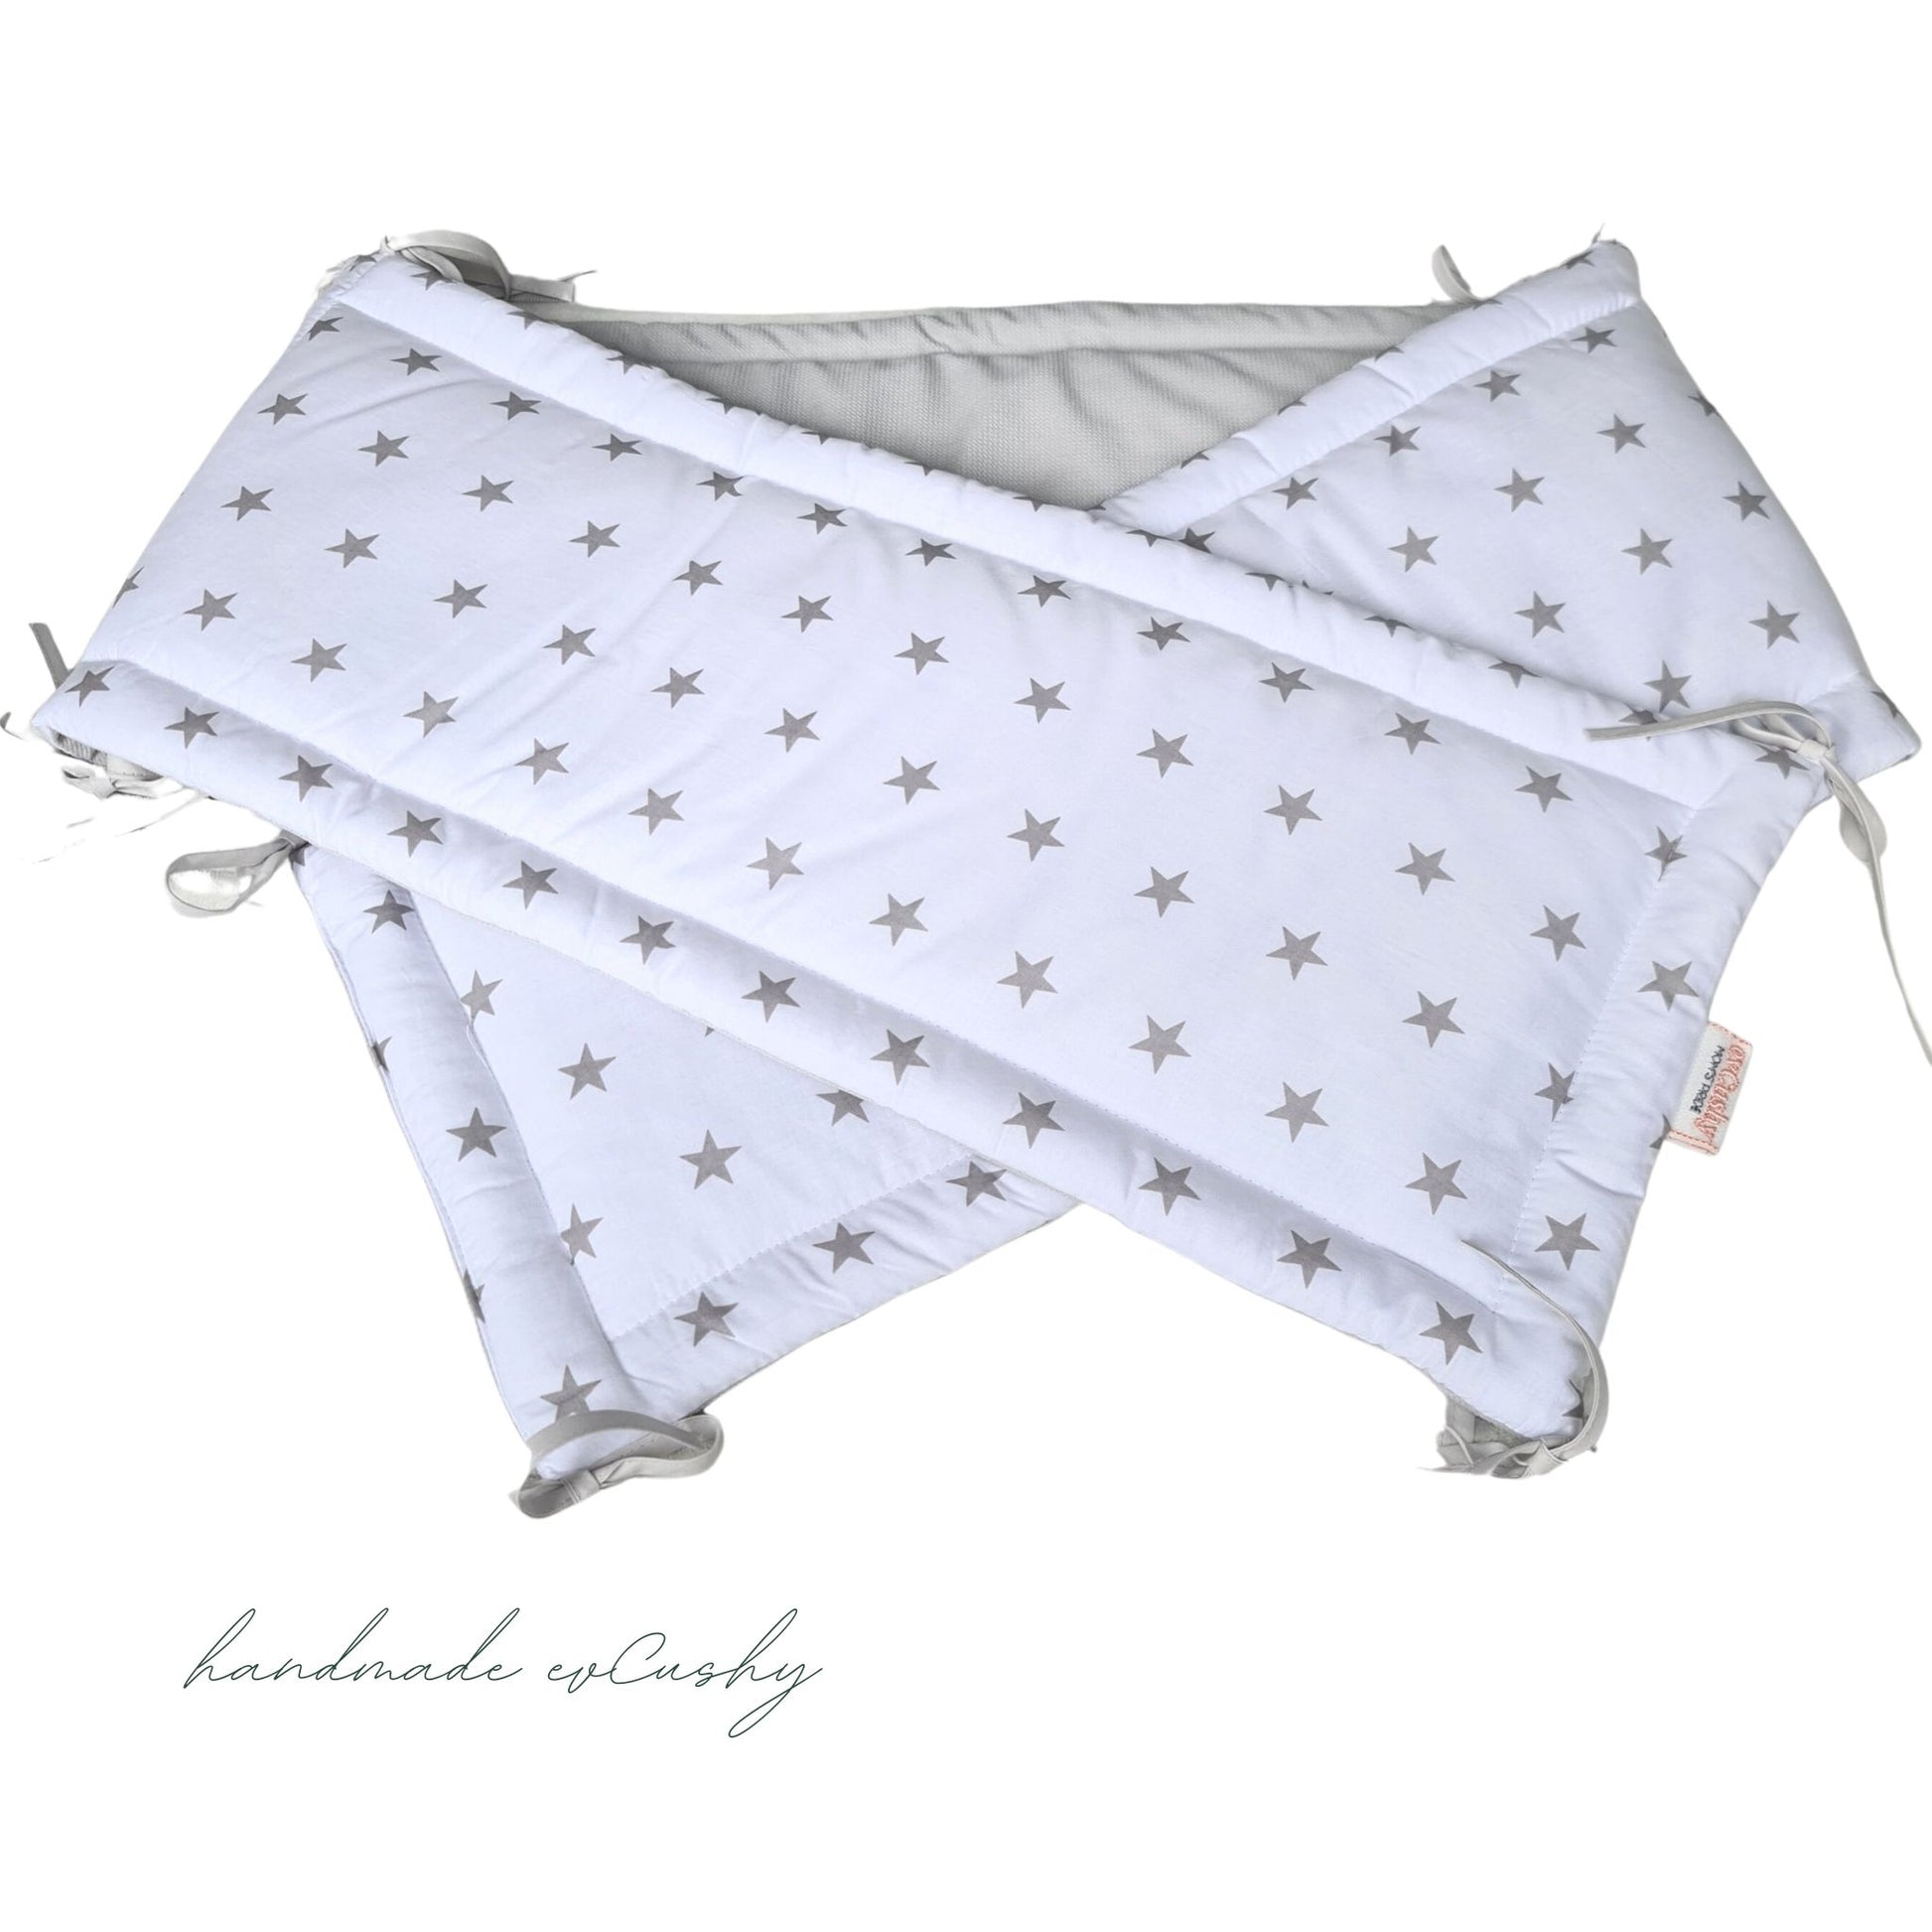 White Bumper with Grey Stars made of Cotton, Reversible Grey Side made of Velvet